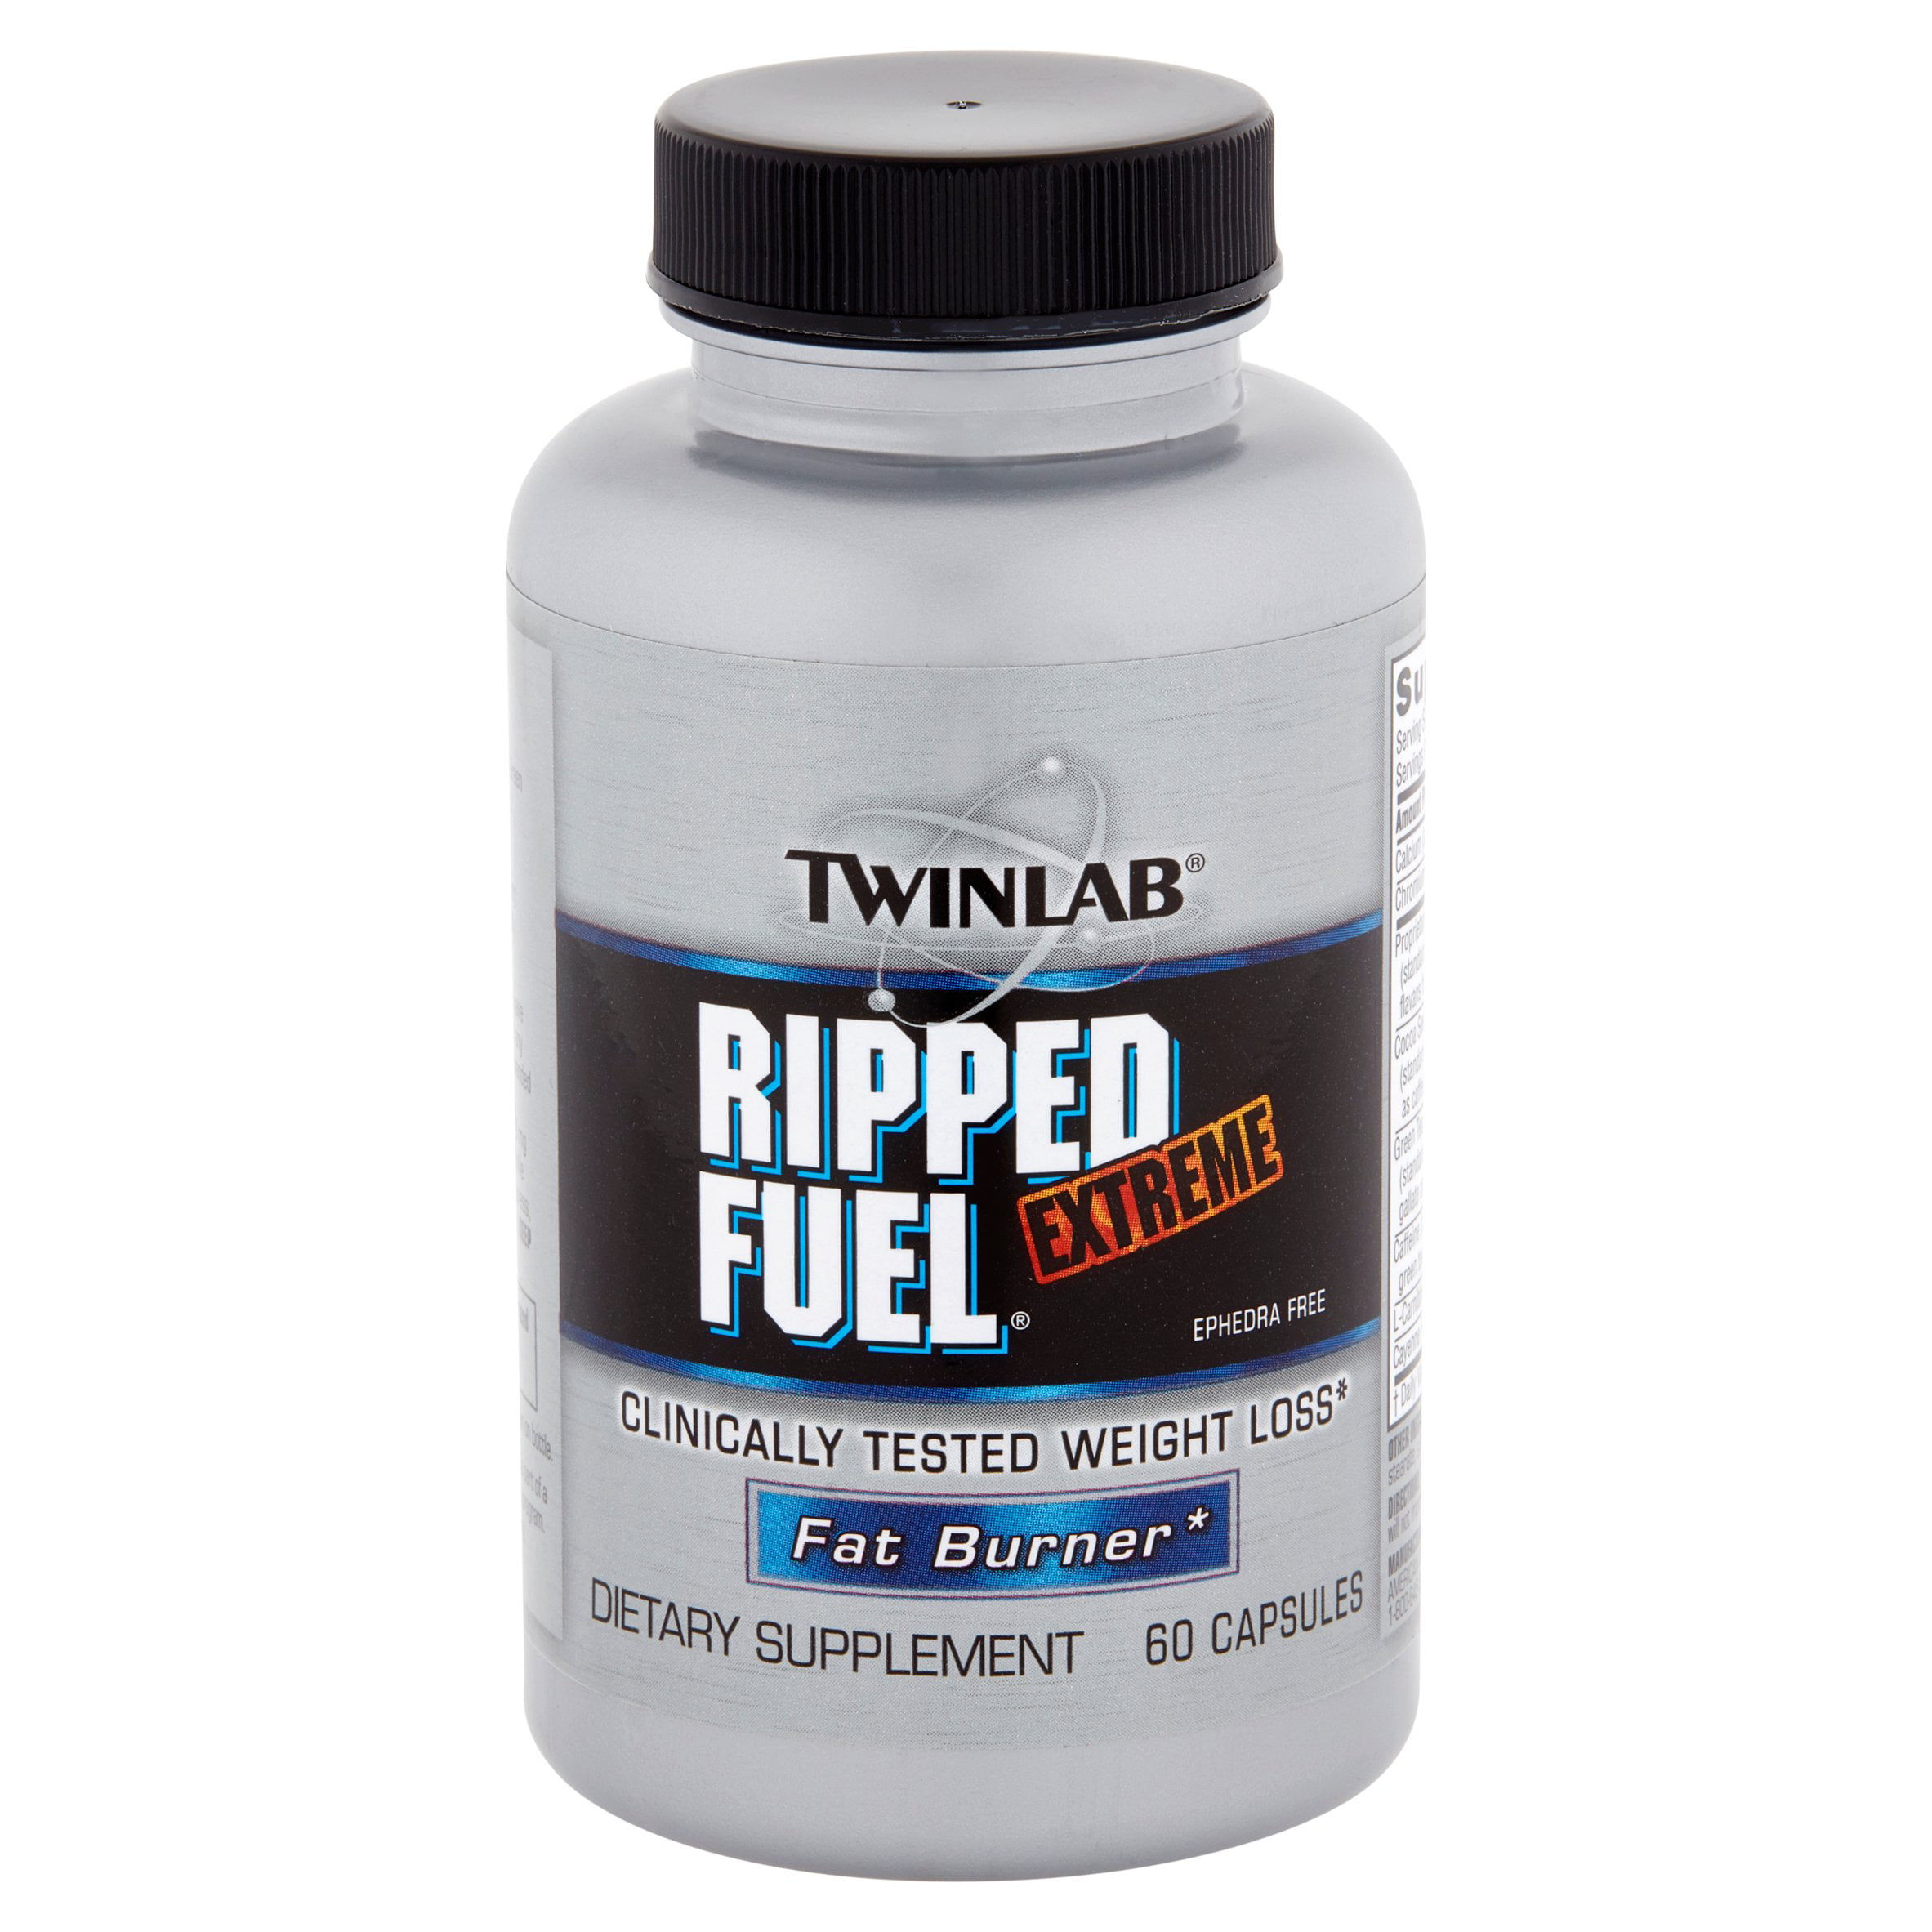 Twinlab Ripped Fuel Extreme Ephedra Free Weight Loss Supplement